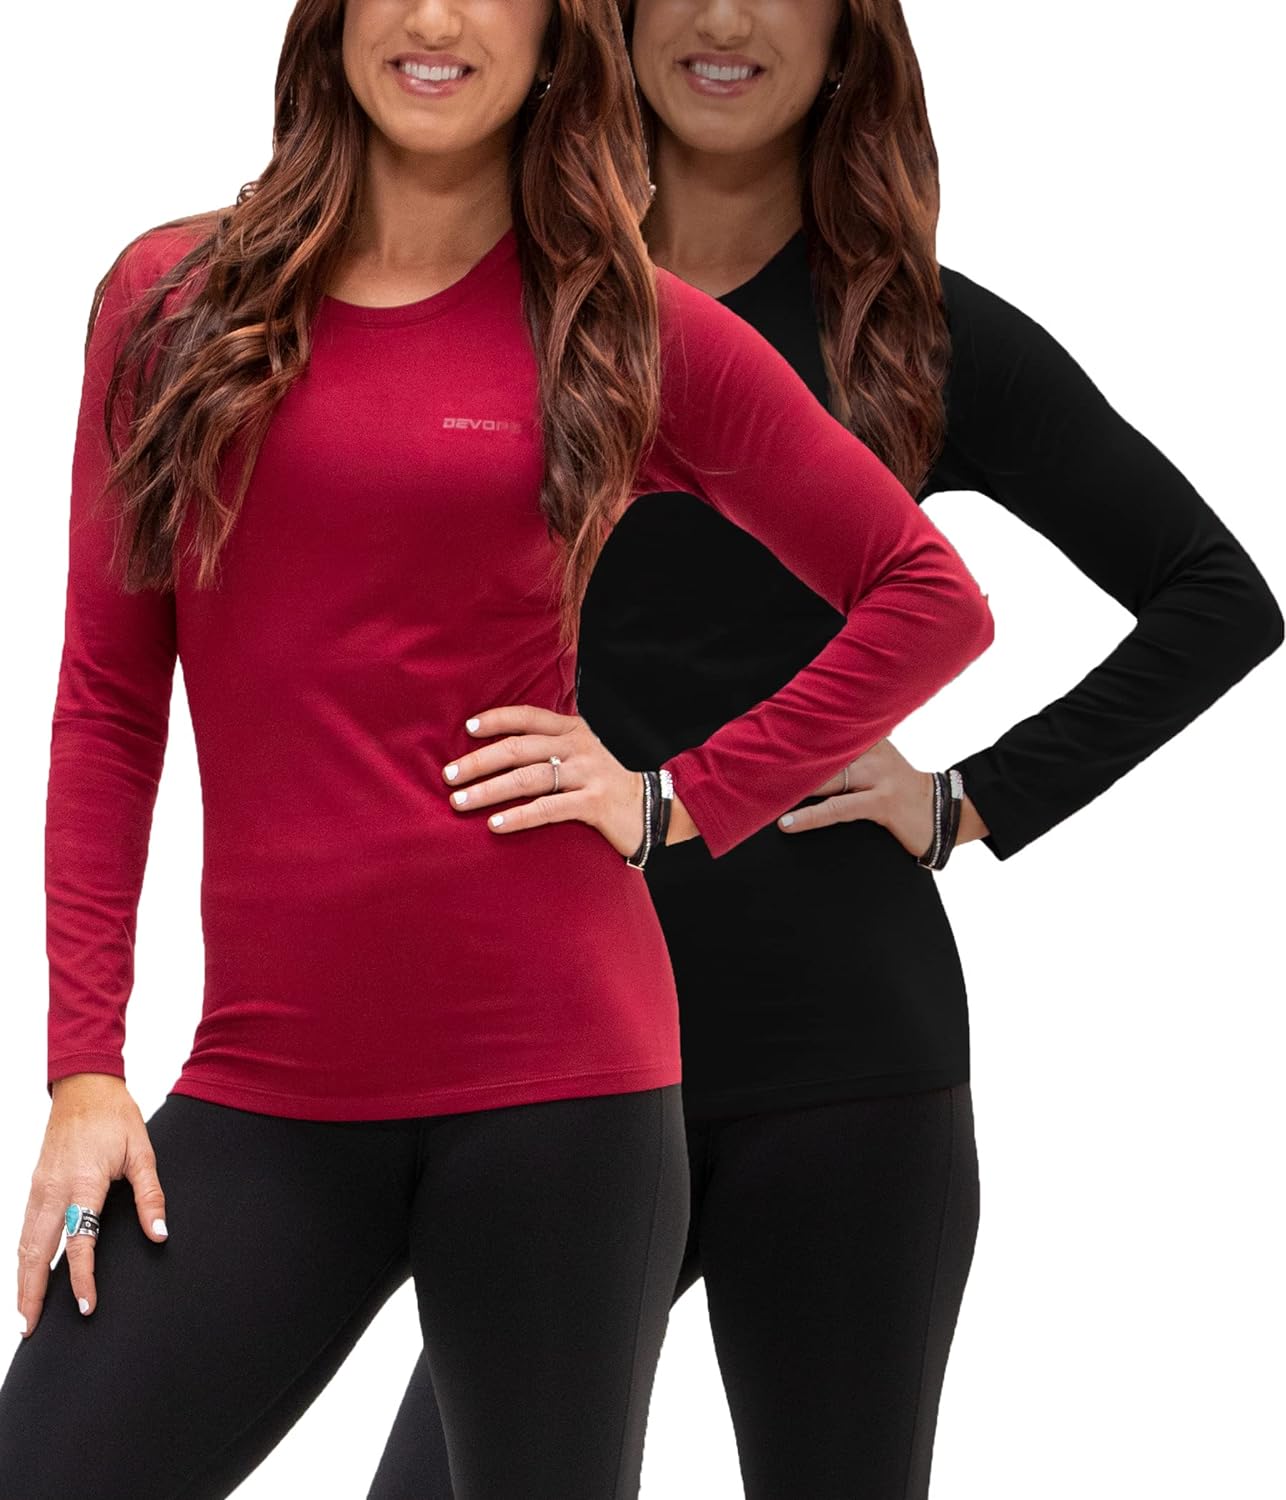 DEVOPS Women's 2 Pack Thermal Long Sleeve Shirts Compression Baselayer Tops